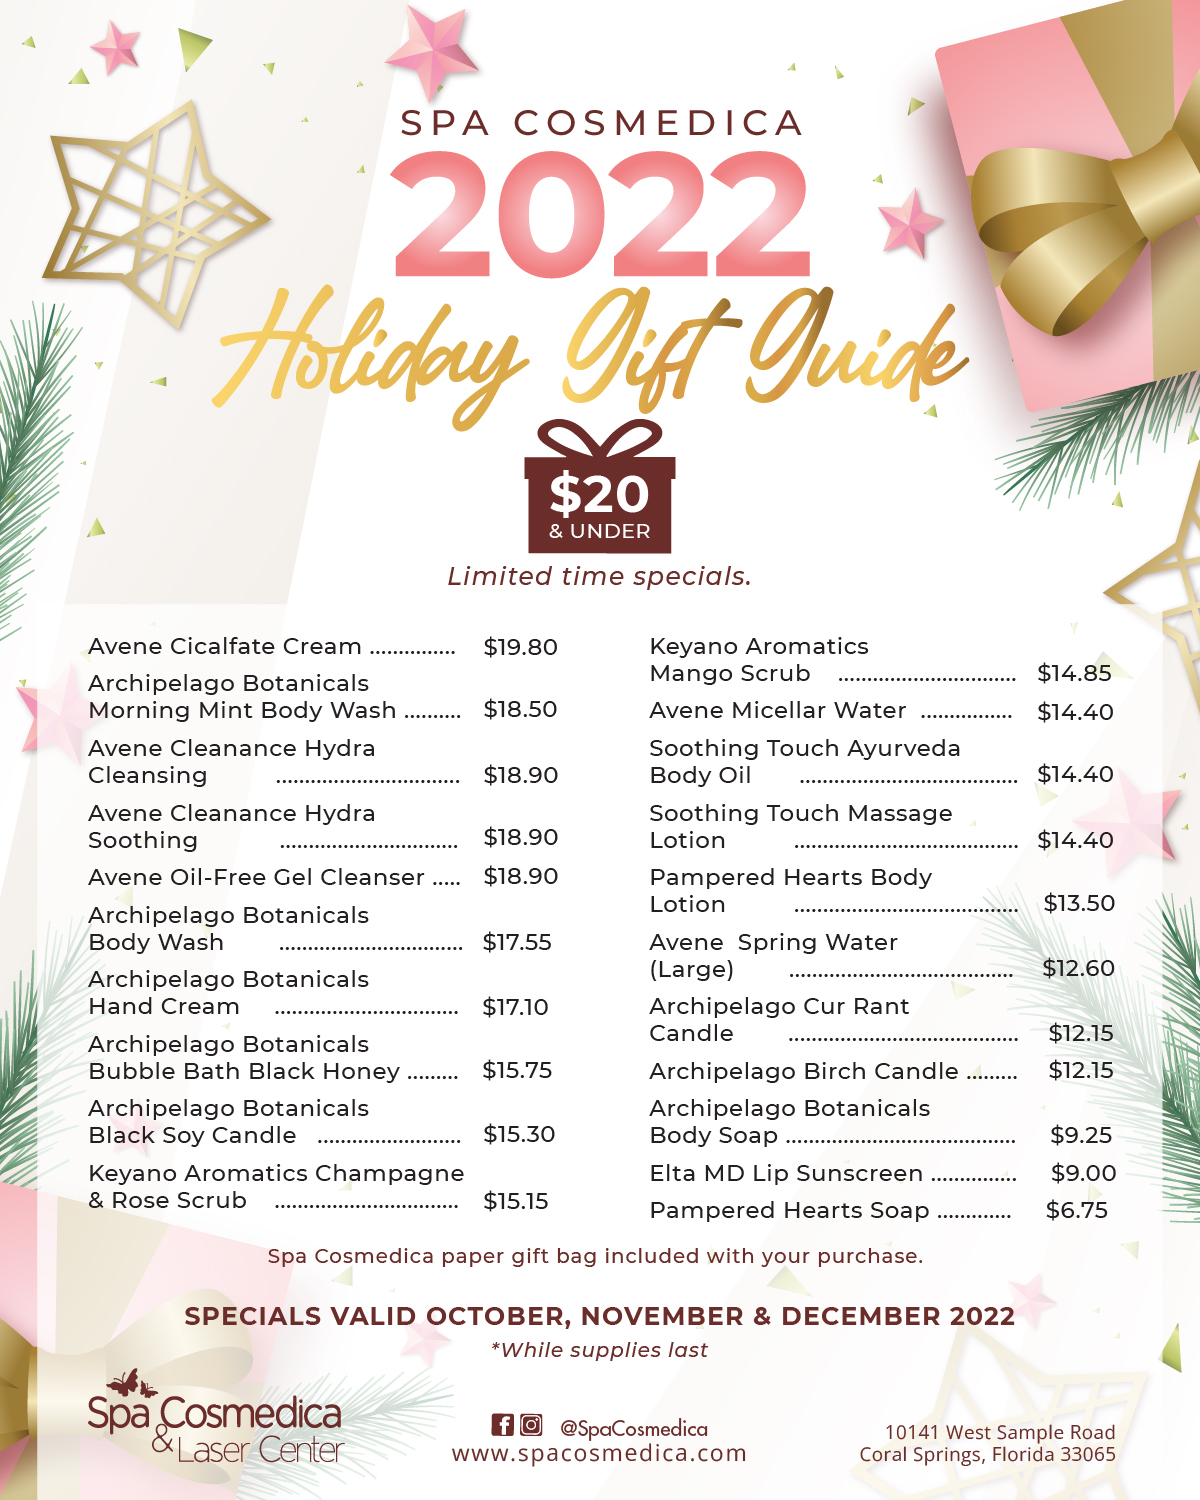 , Need Holiday Gift Ideas? Then We Can Help With These Spa Gift Specials!